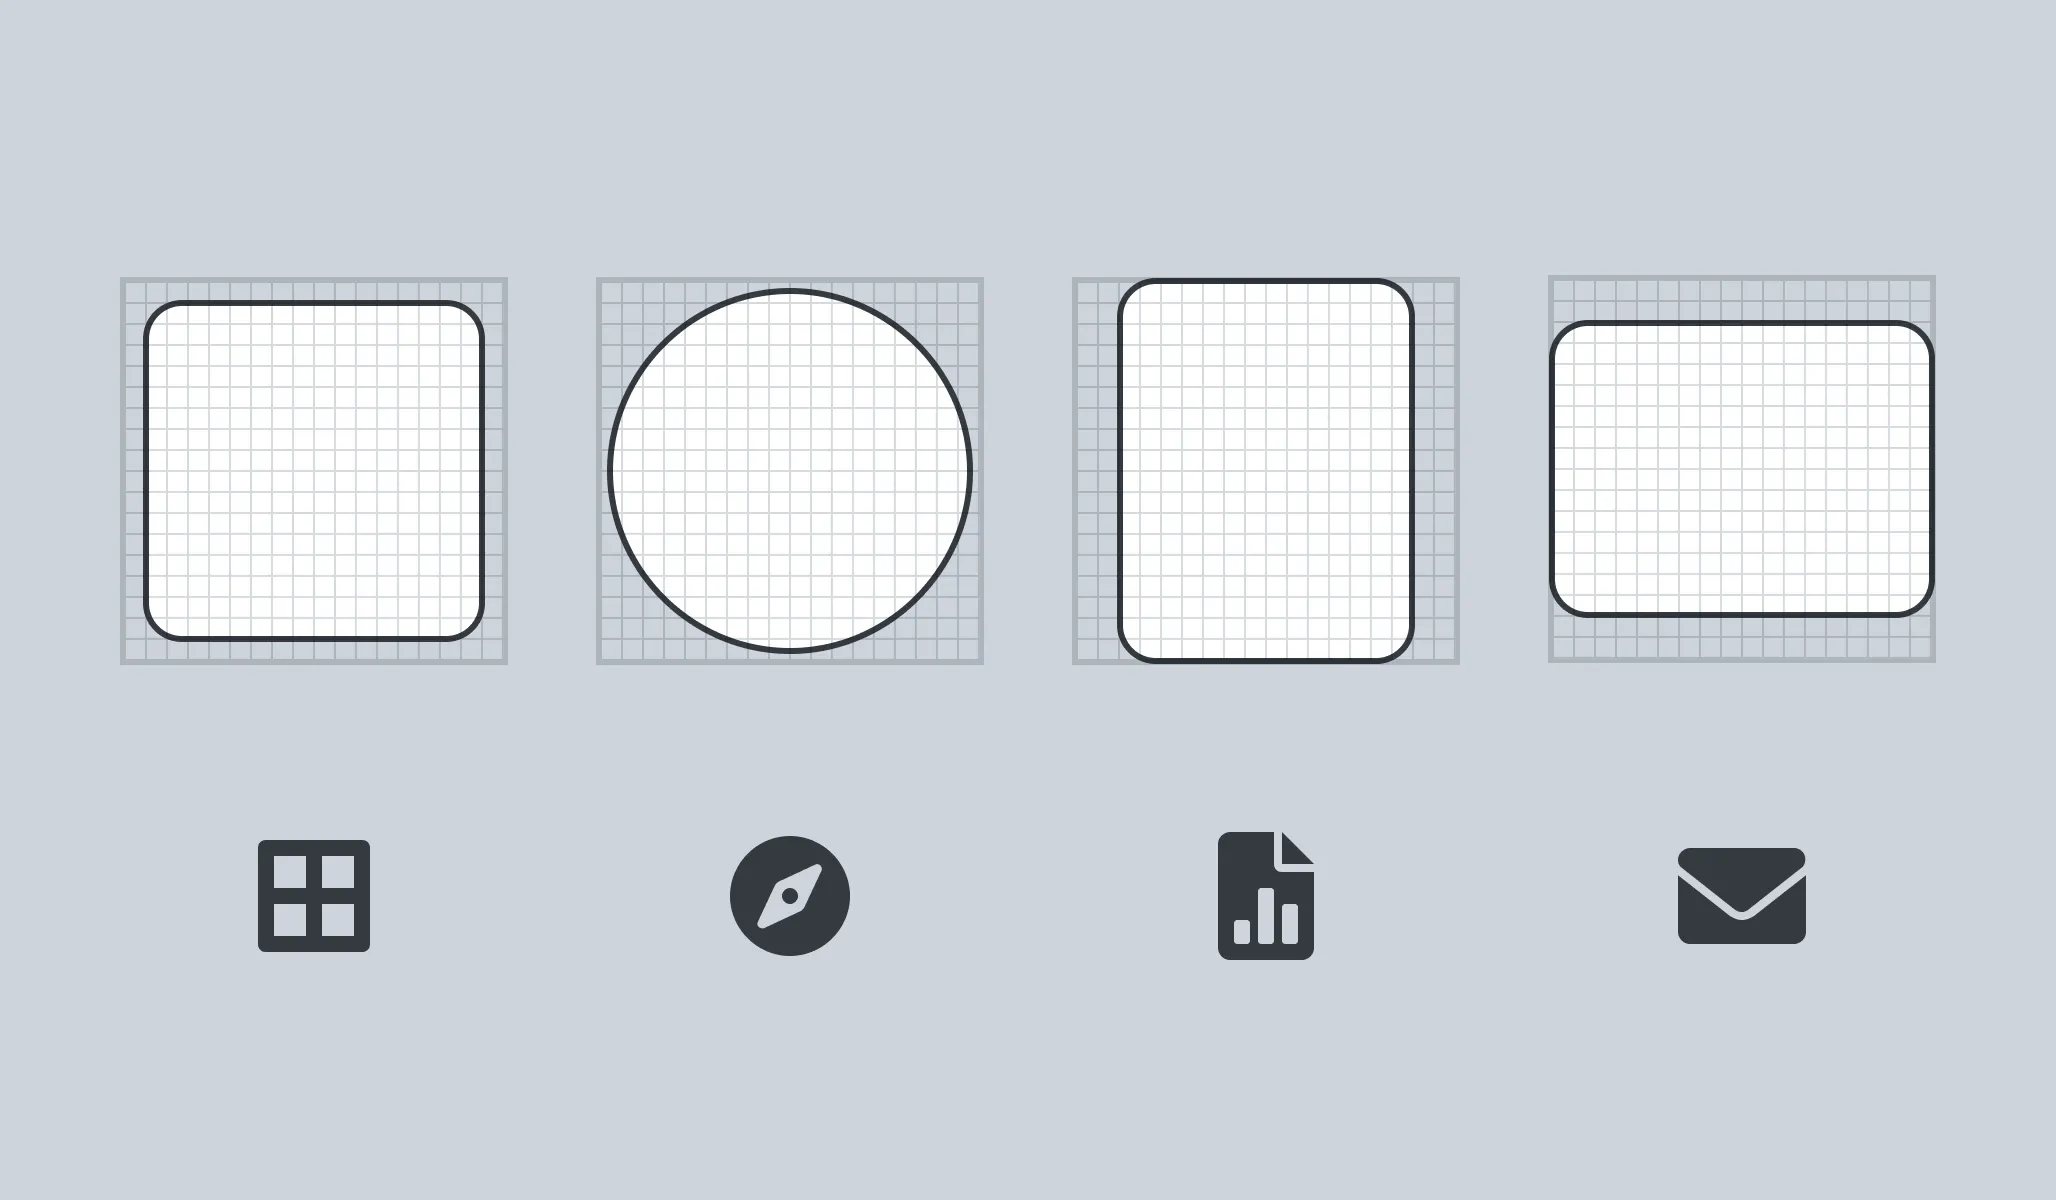 Basic shapes in the icon pixel grid